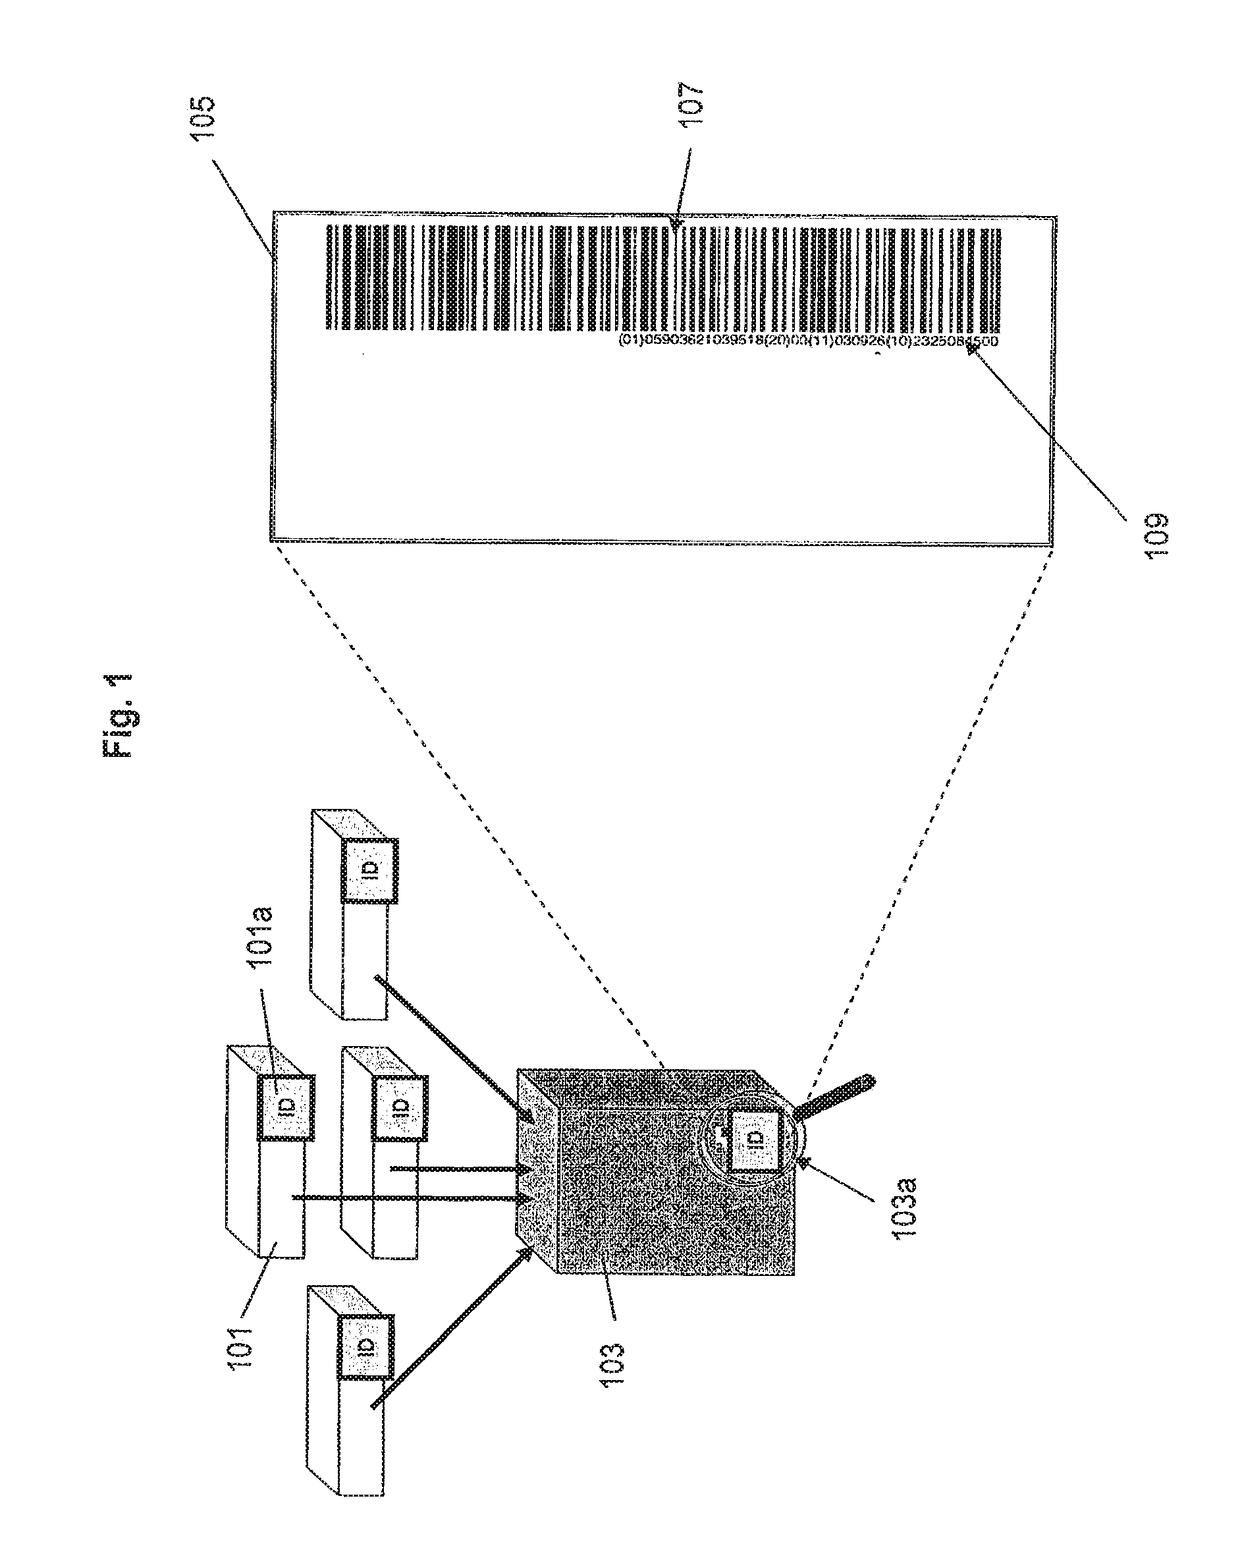 Method and Apparatus for Identifying, Authenticating, Tracking and Tracing Manufactured Items